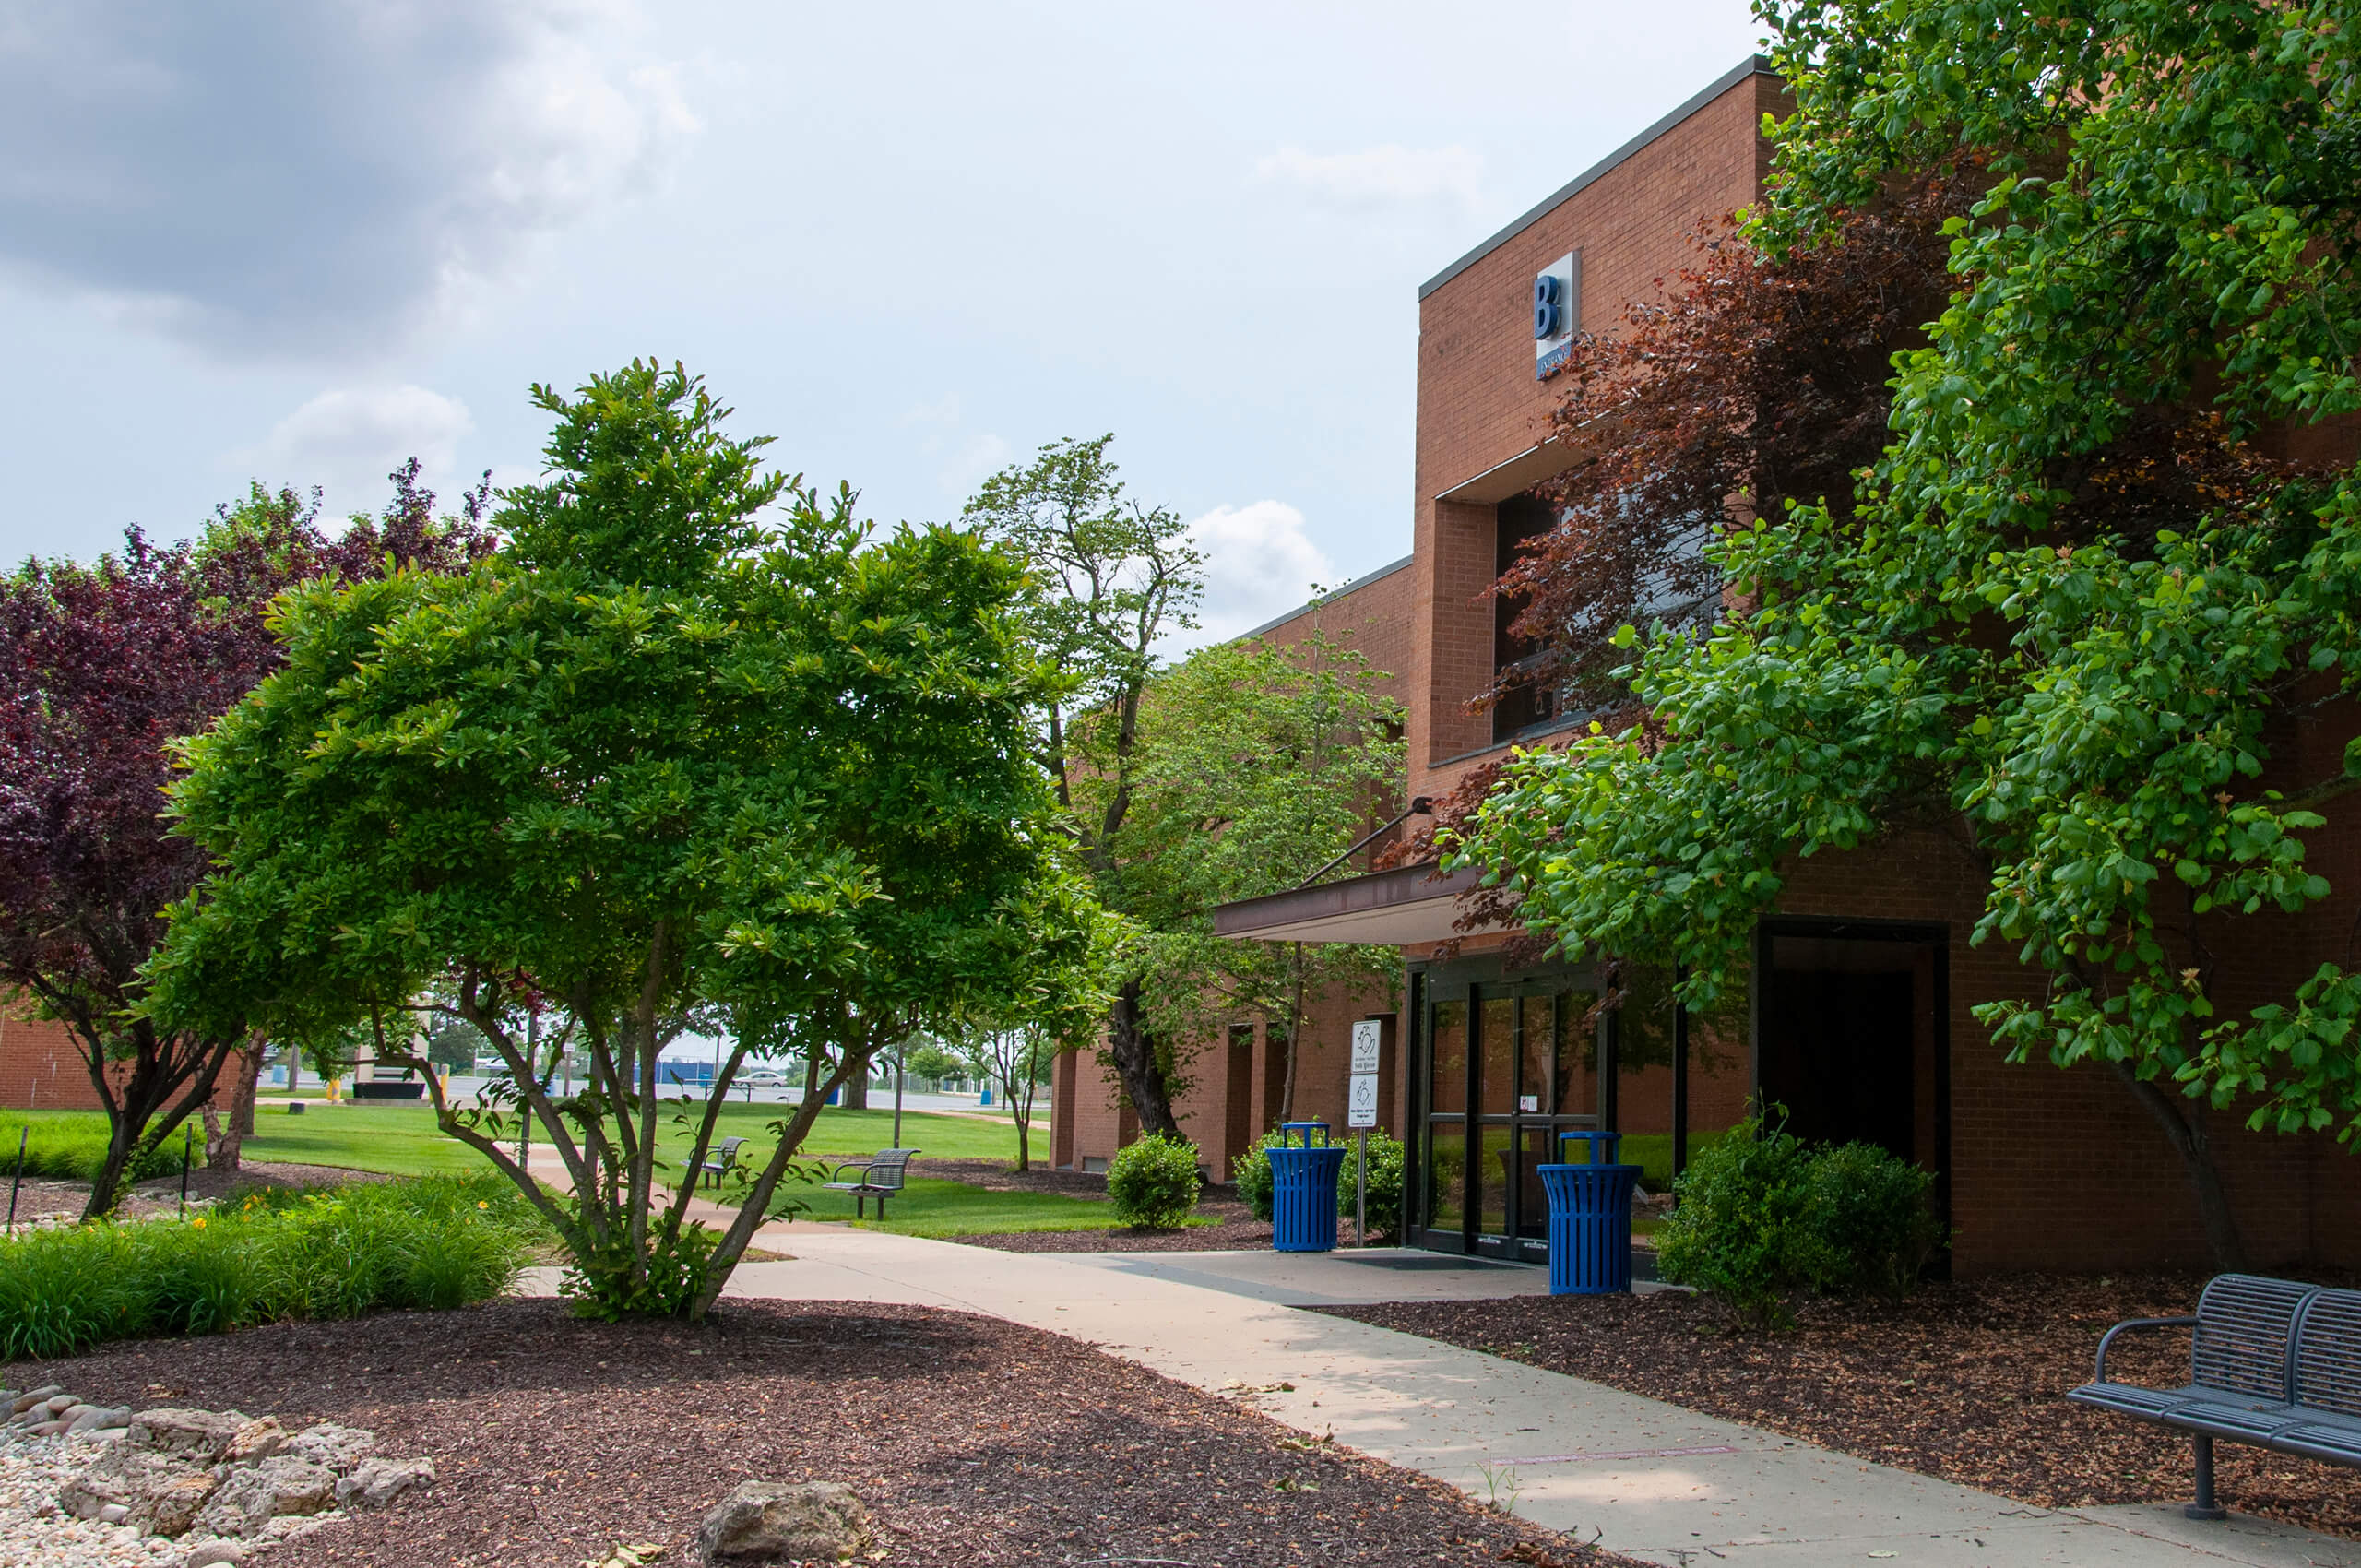 Profile photo of the Main Complex B Entrance on the Belleville campus.